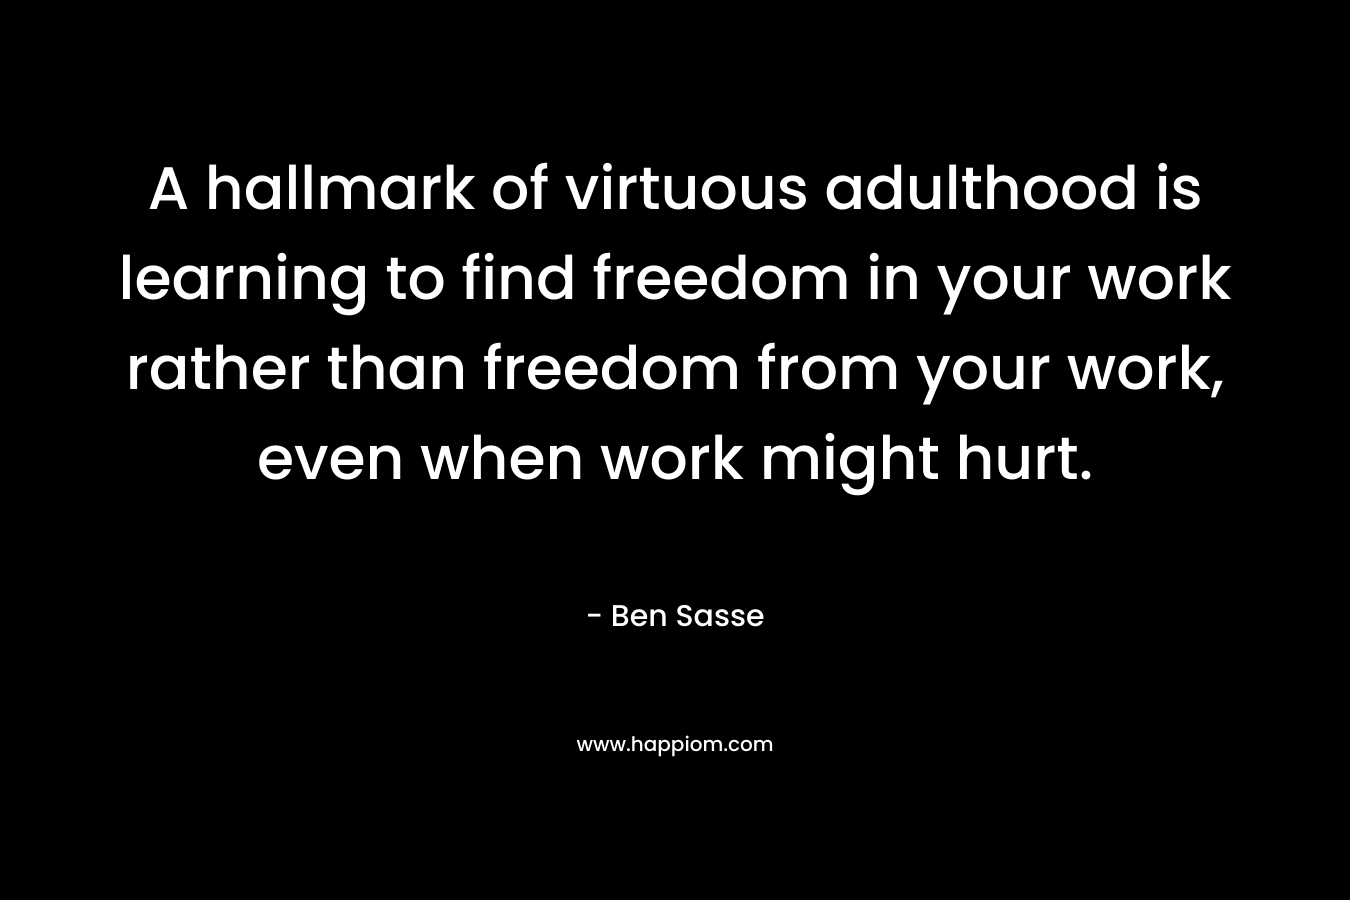 A hallmark of virtuous adulthood is learning to find freedom in your work rather than freedom from your work, even when work might hurt.